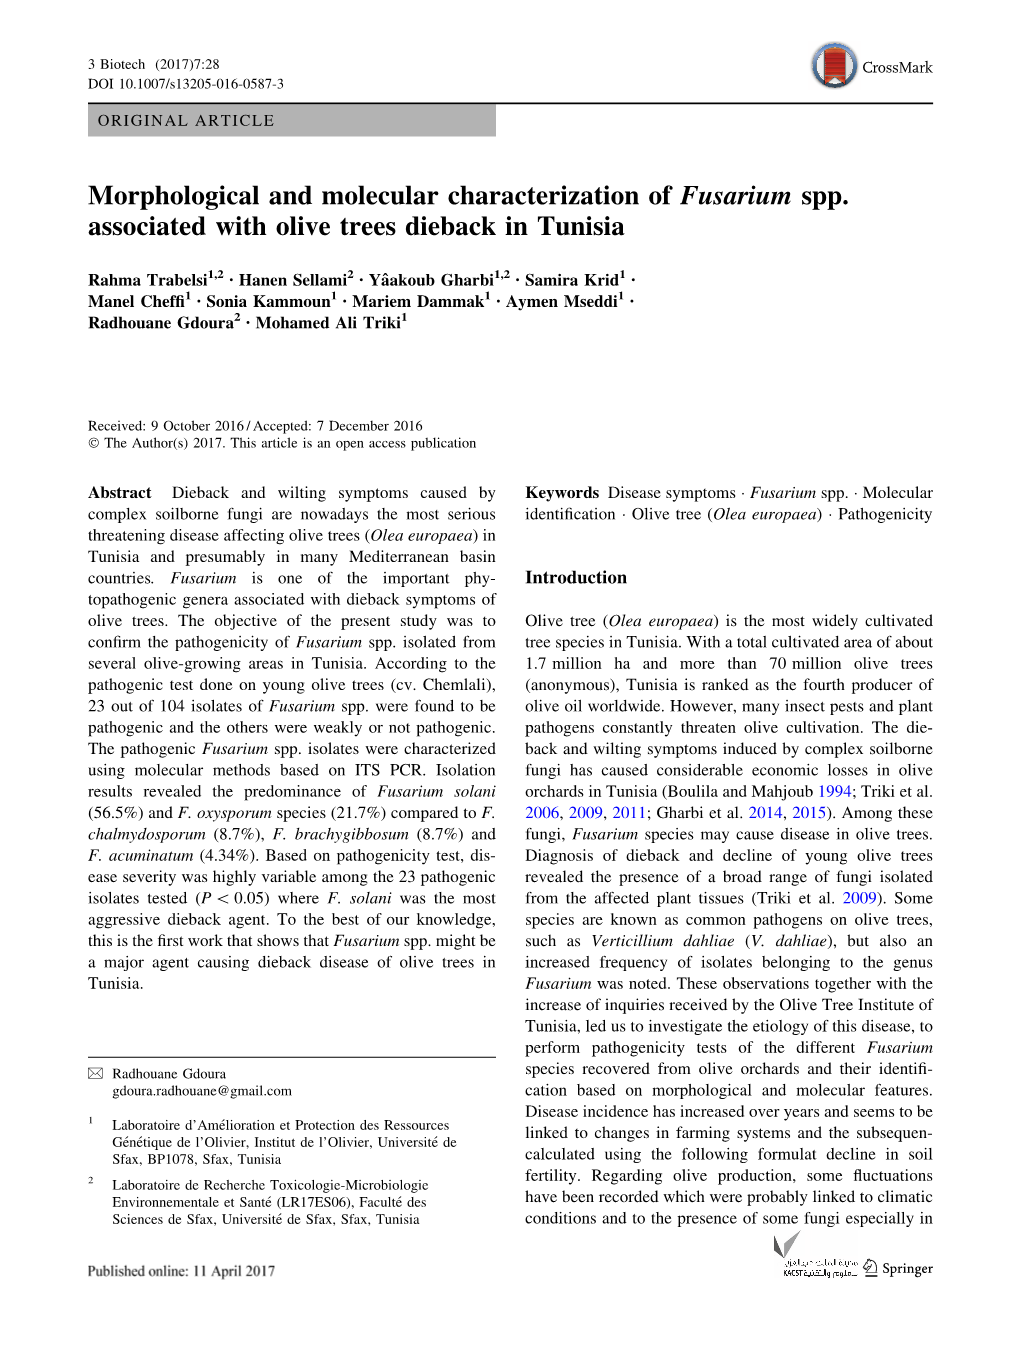 Morphological and Molecular Characterization of Fusarium Spp